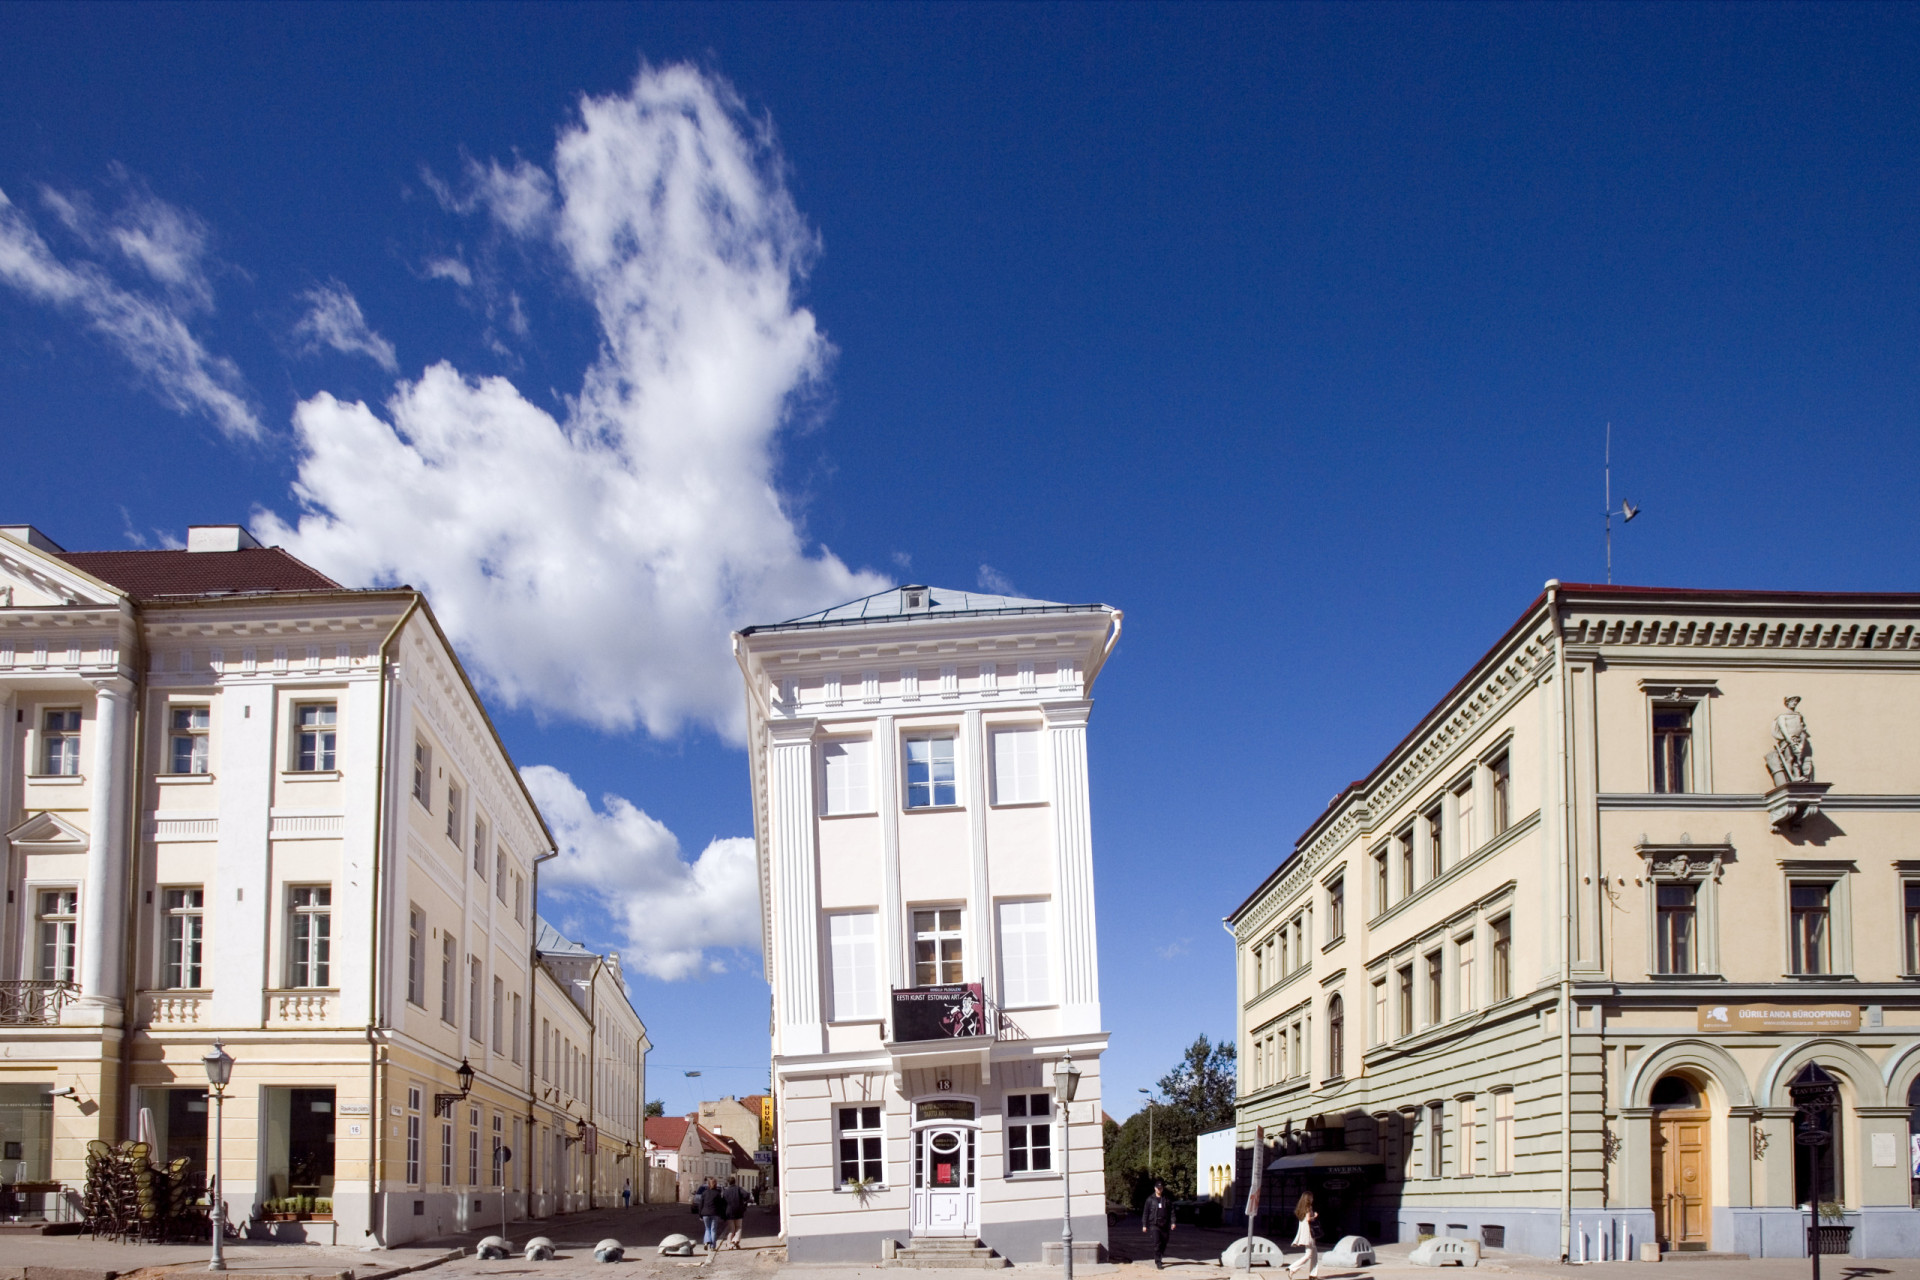 <p>The Estonian city of Tartu has long been considered by the locals as the country’s summer capital. In fact, while this European Capital of Culture hibernates during the cold winter, it seems to come alive once summer arrives.</p><p>You may also like:<a href="https://www.starsinsider.com/n/267781?utm_source=msn.com&utm_medium=display&utm_campaign=referral_description&utm_content=701834en-us"> All the times the British royal family turned up in unexpected places</a></p>